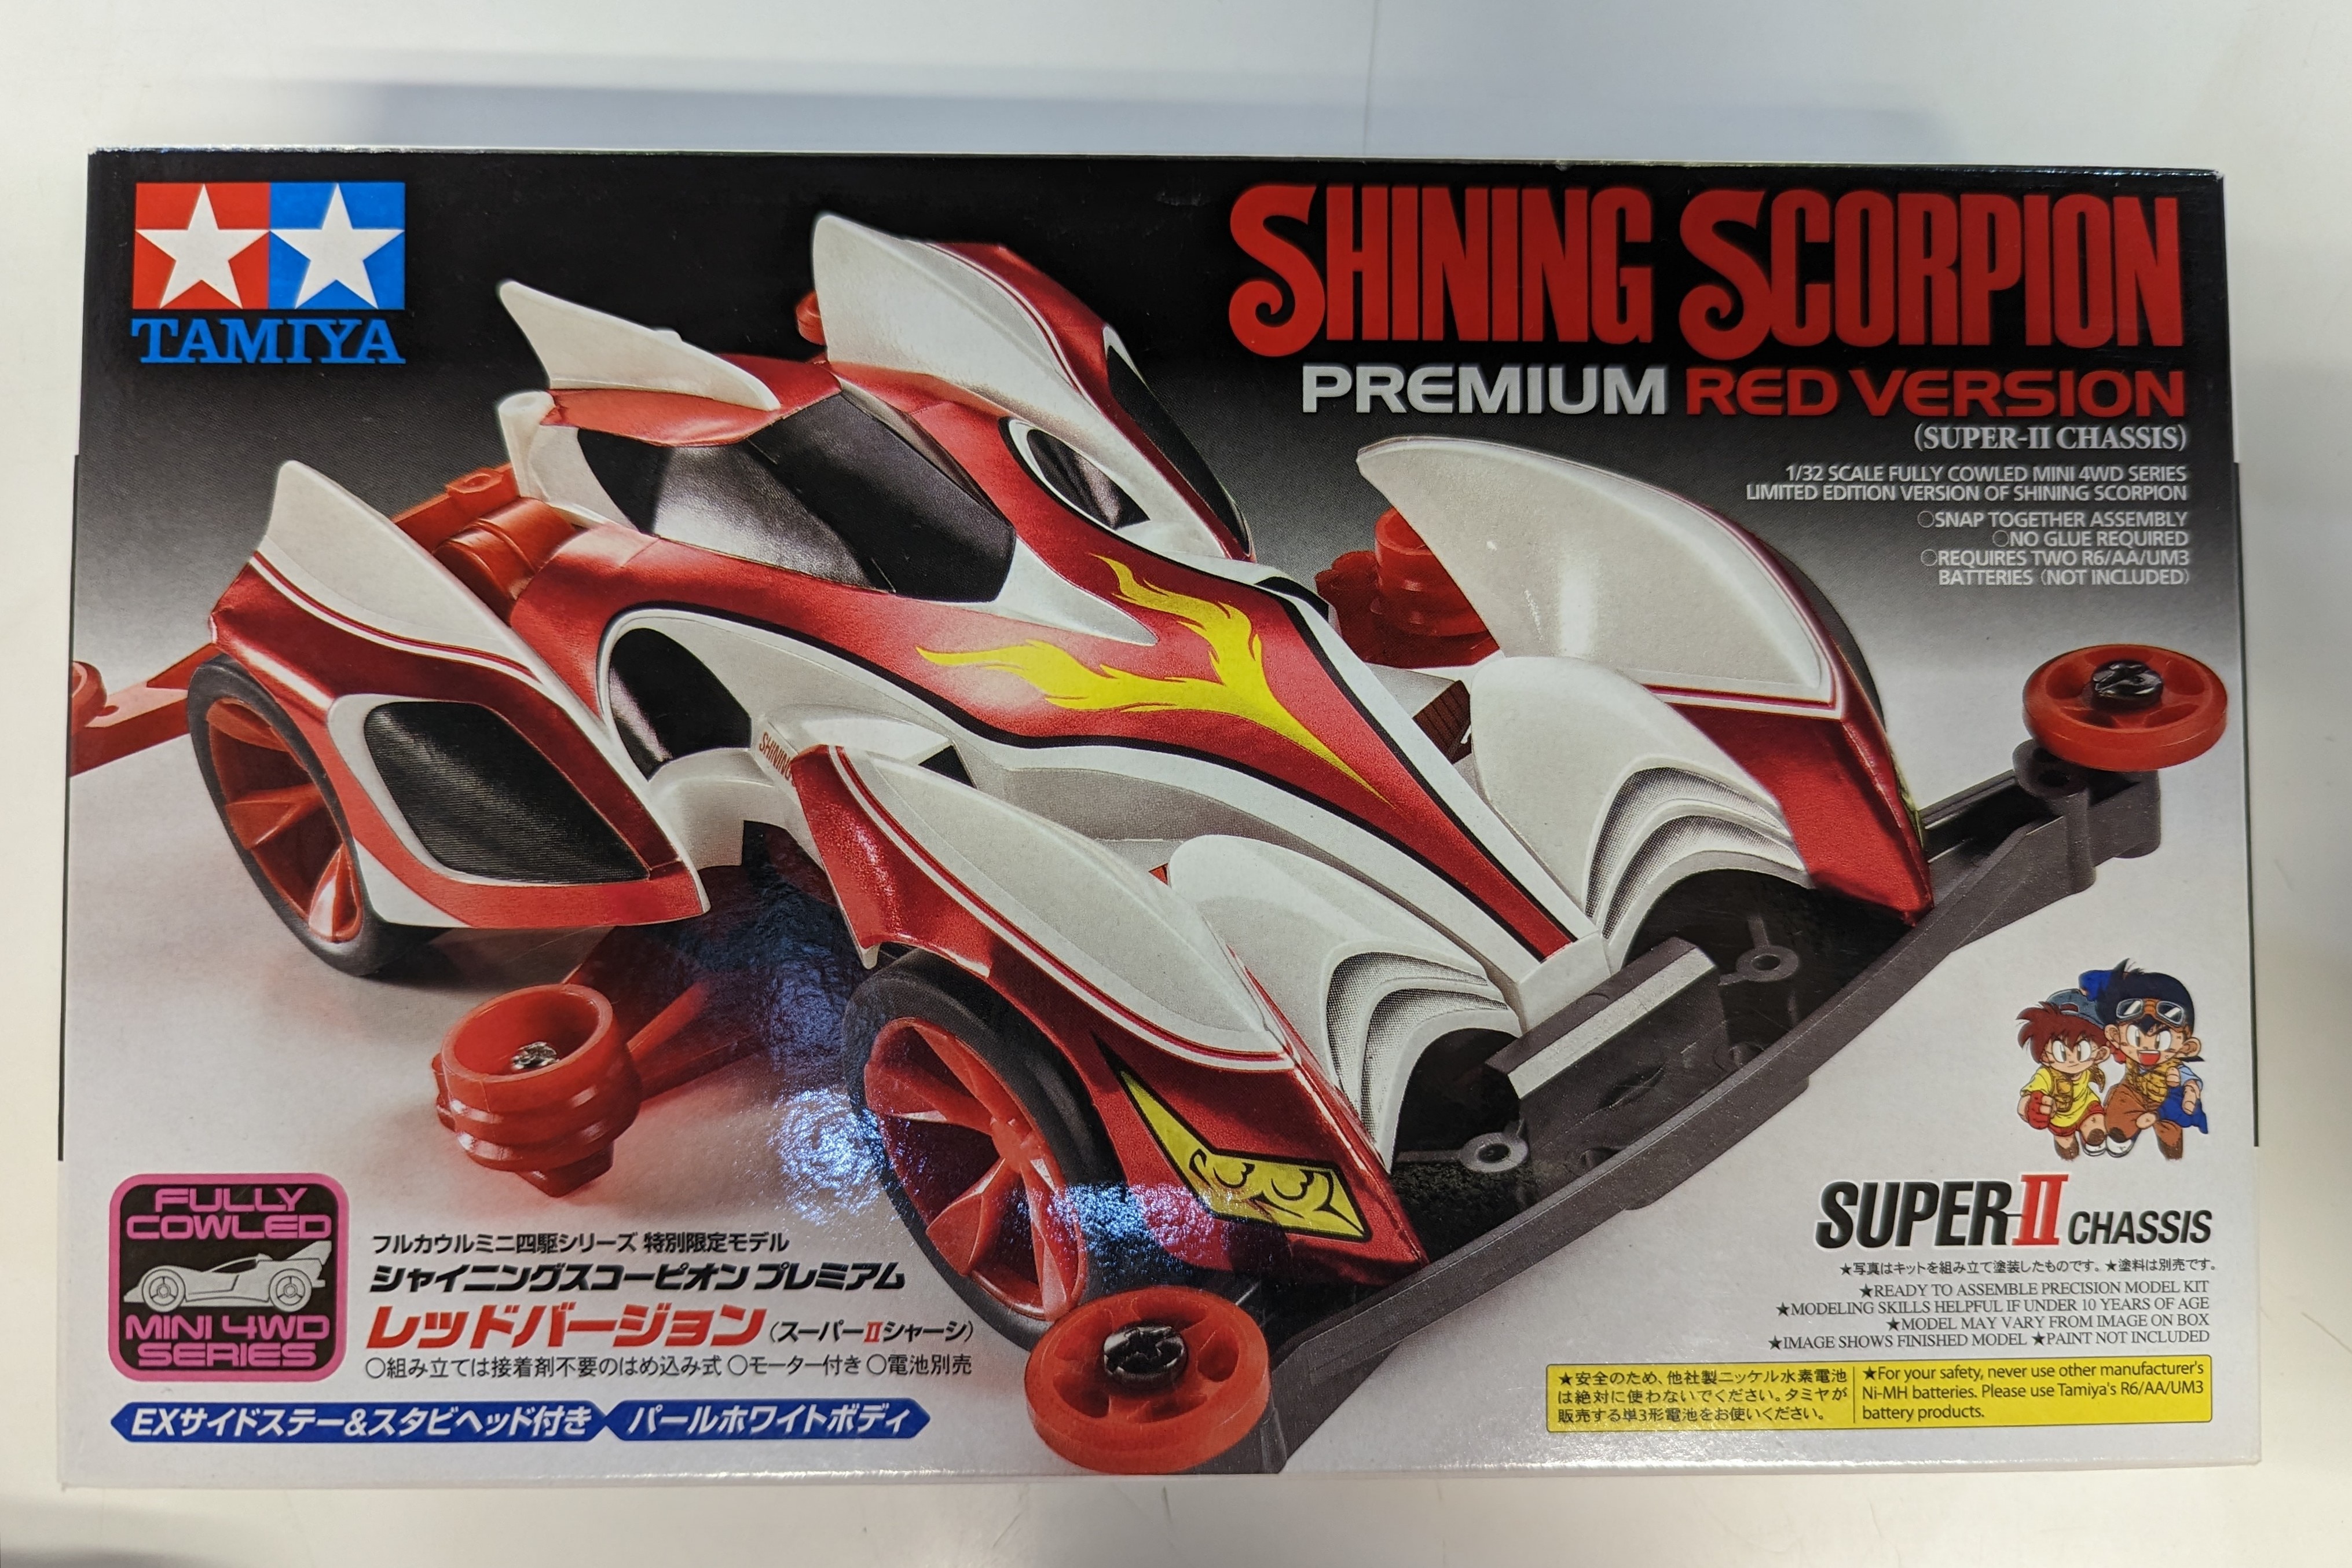 Tamiya Full Cowl Mini 4WD series Special Limited Model MADE IN